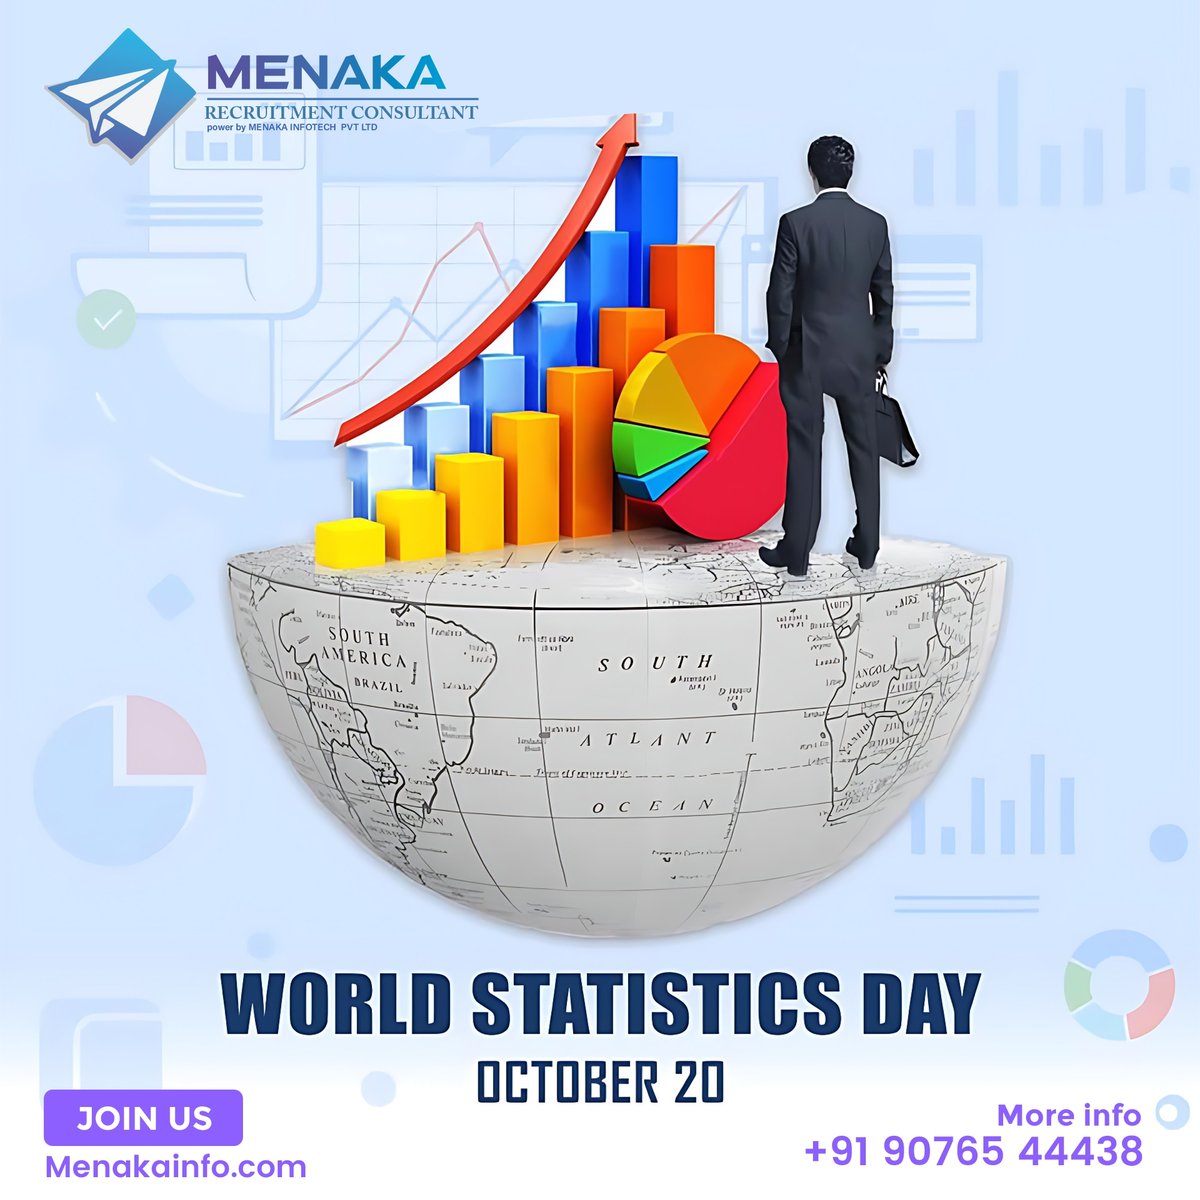 'Empower Your Career on World Statistics Day! Discover Data-Driven Opportunities with Menaka Recruitment  📊🌍 #DataDrivenSuccess #CareerStatistics #UnlockYourPotential'
.